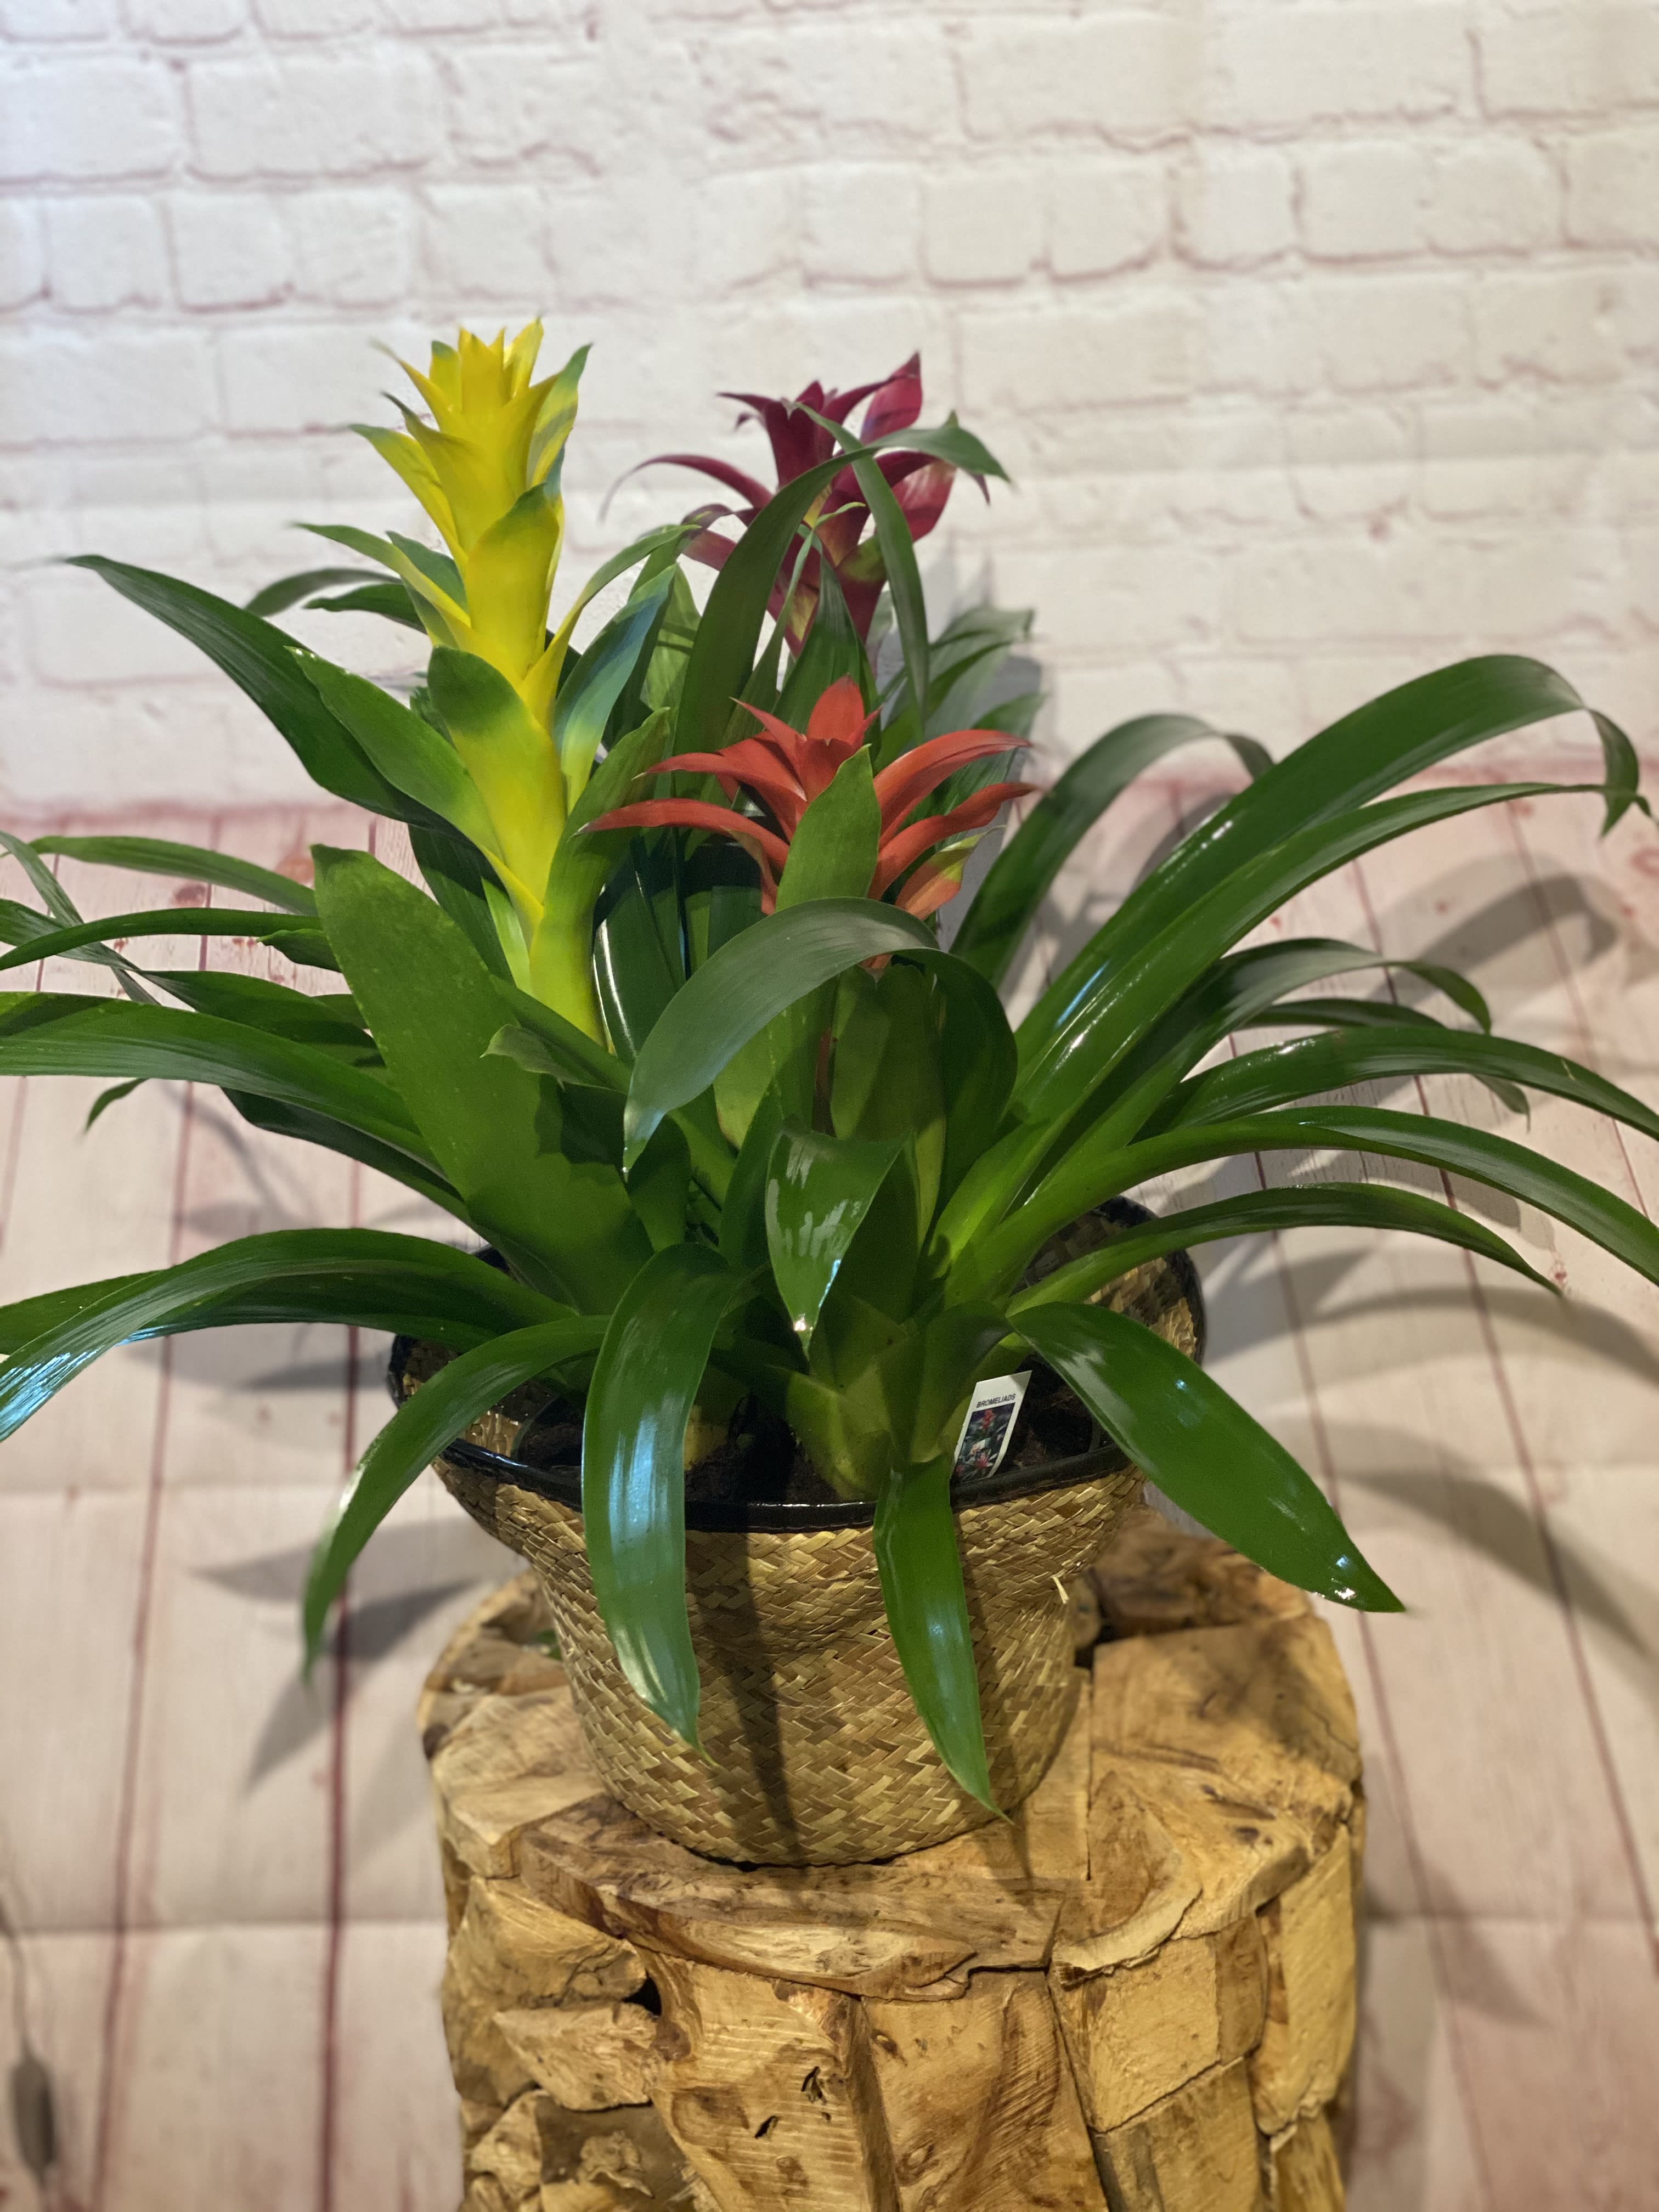 Triple Bromeliad Planter - This lovely bromeliad planter is a perfect gift to celebrate a new job or housewarming - it'll look right at home in any environment!  Three bromeliad plants arrive in a terra cotta pot, ready to enjoy for seasons to come!  Approximately 16&quot; W x 15&quot; H